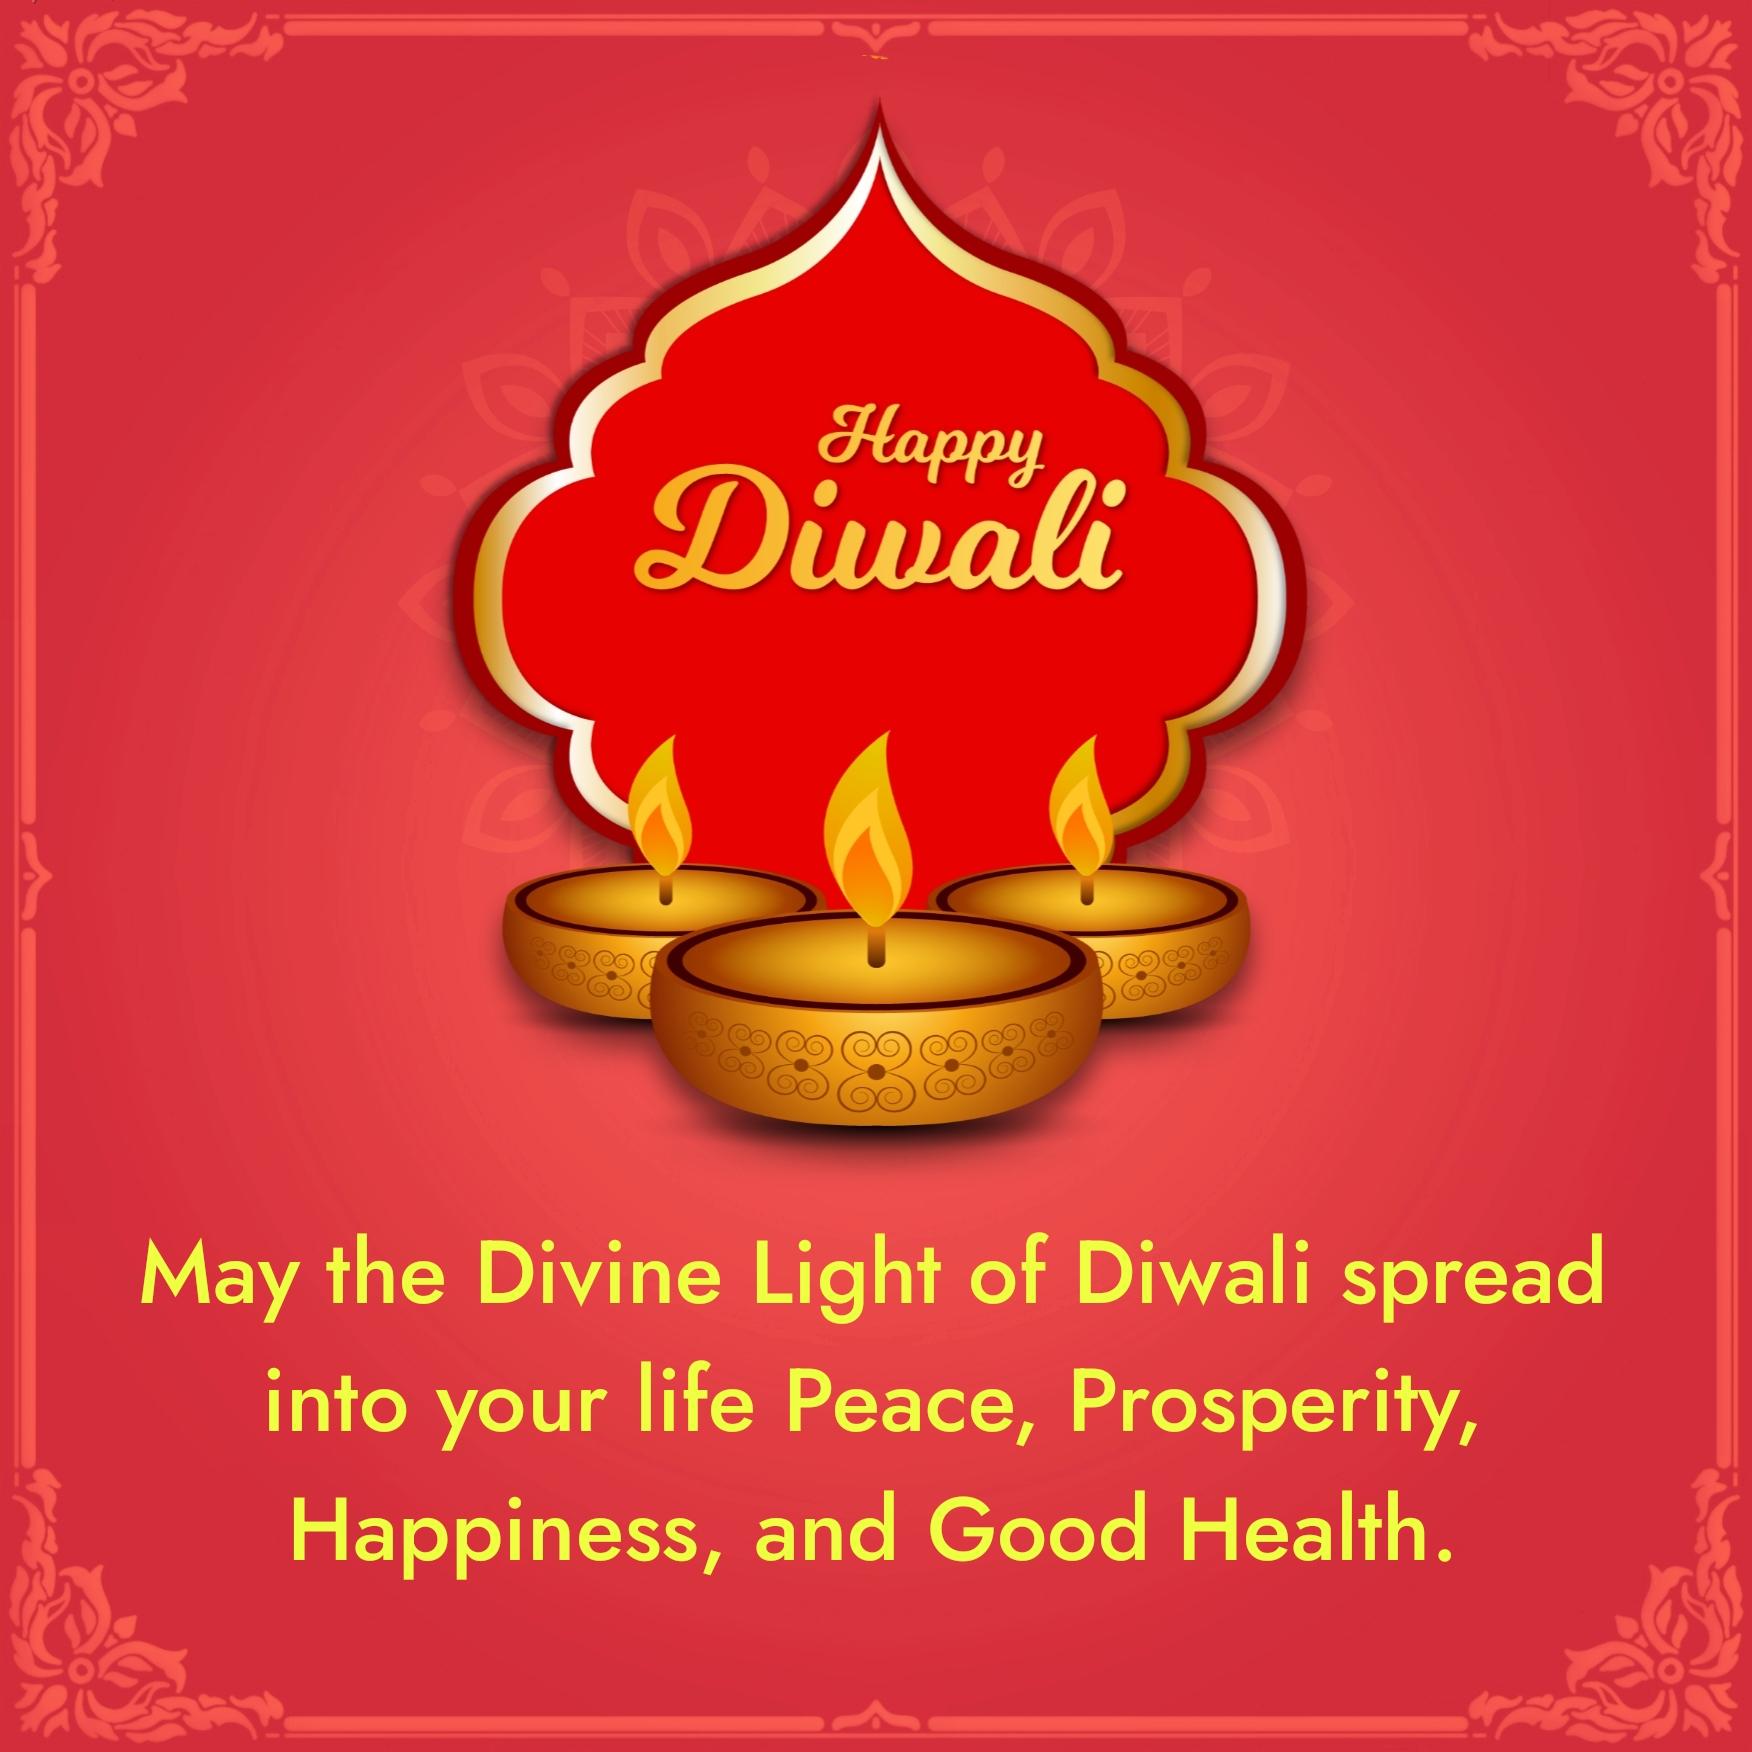 May the Divine Light of Diwali spread into your life